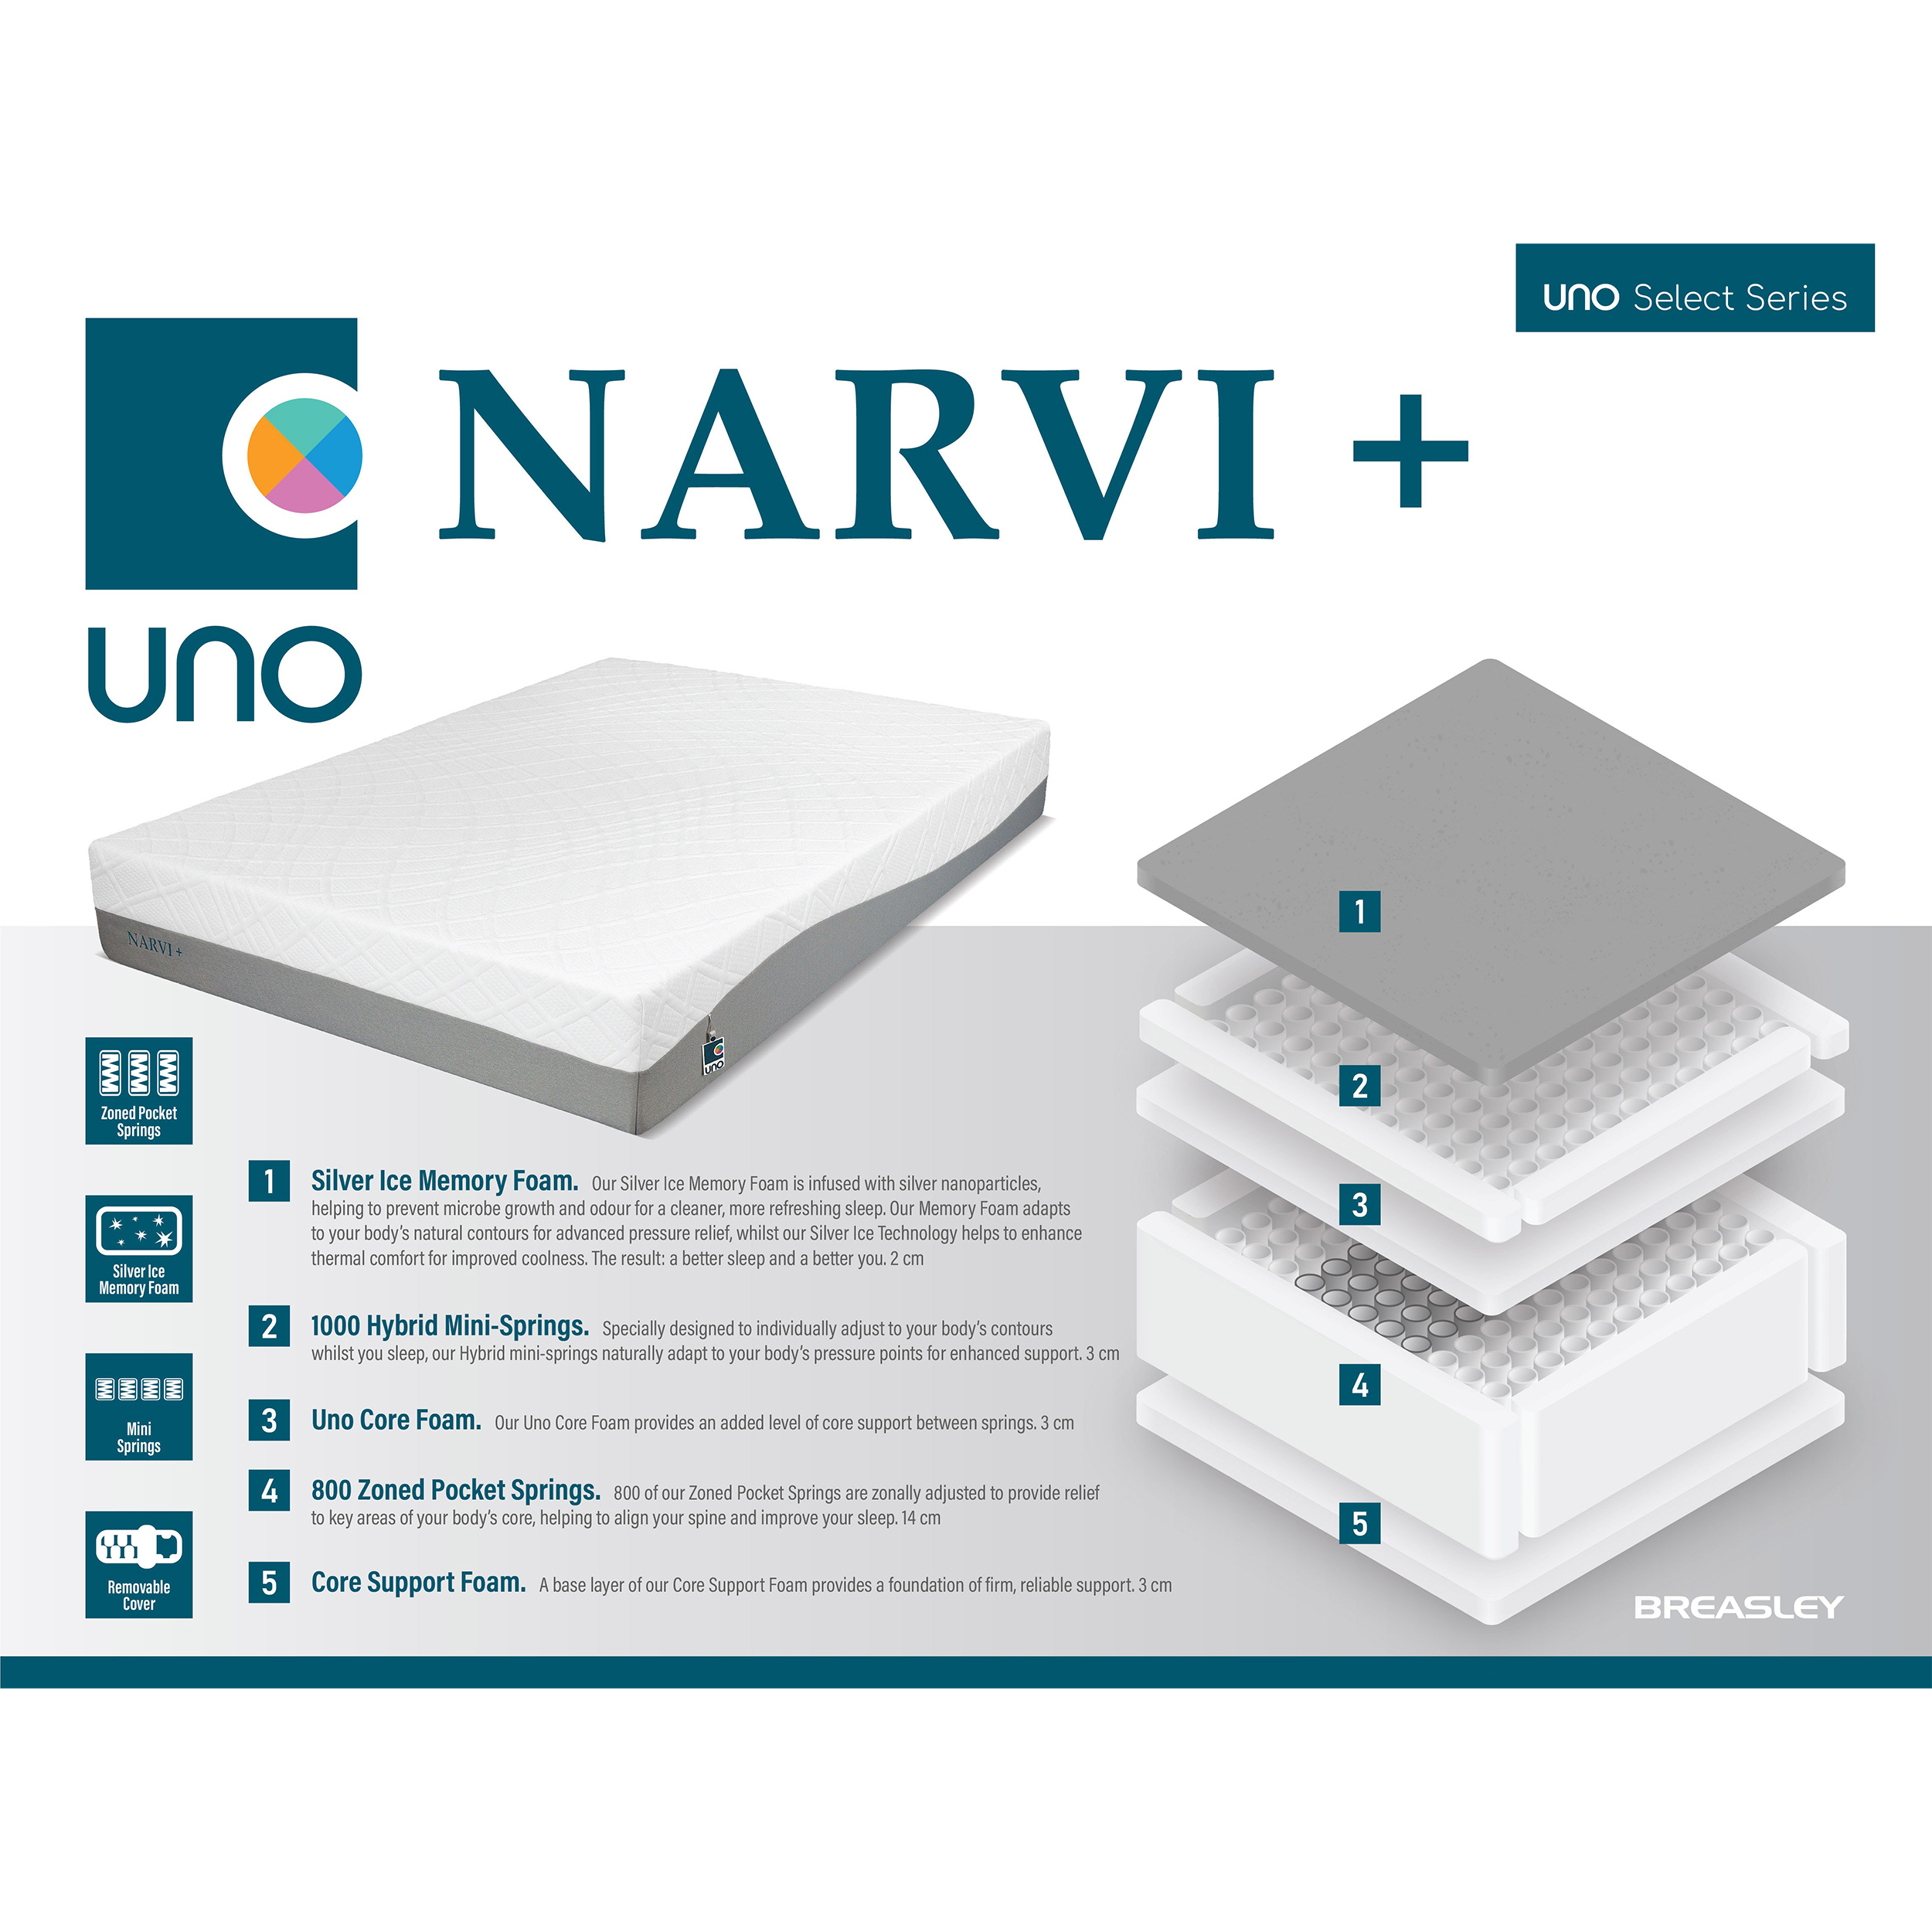 Breasley UNO Narvi PLUS Memory Pocket Support 3ft Mattress